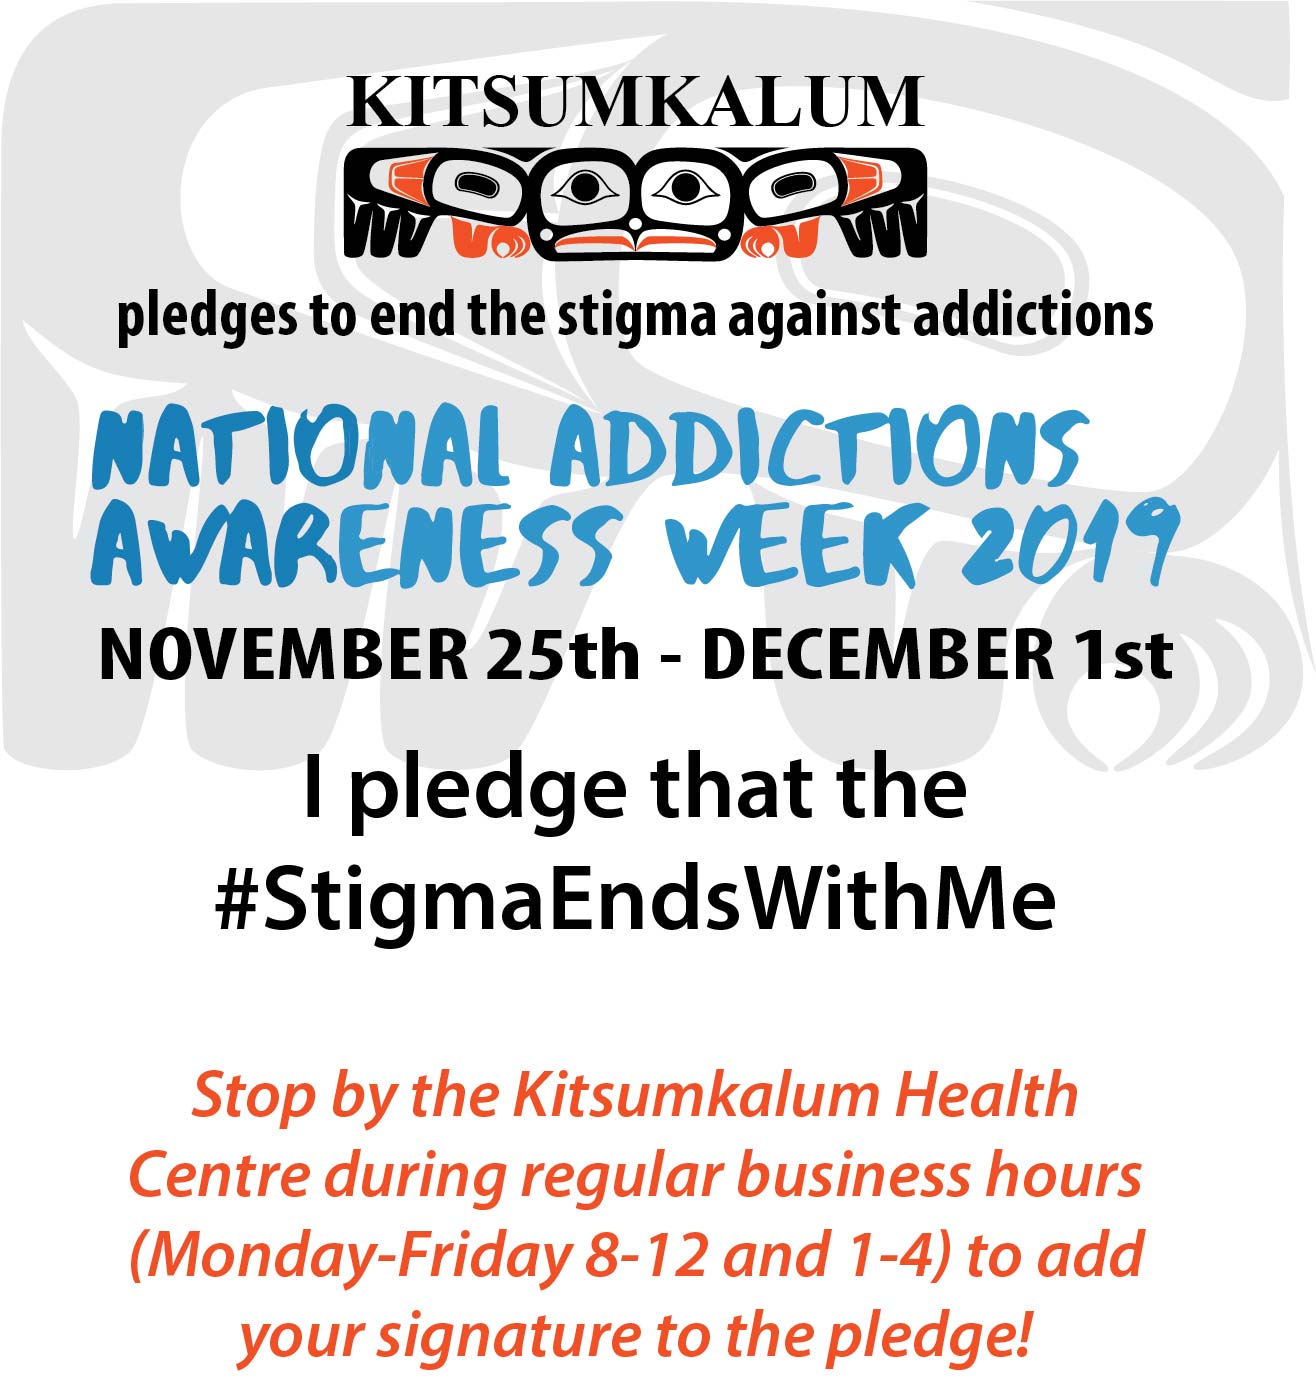 Sign the Pledge to End the Stigma Against Addictions